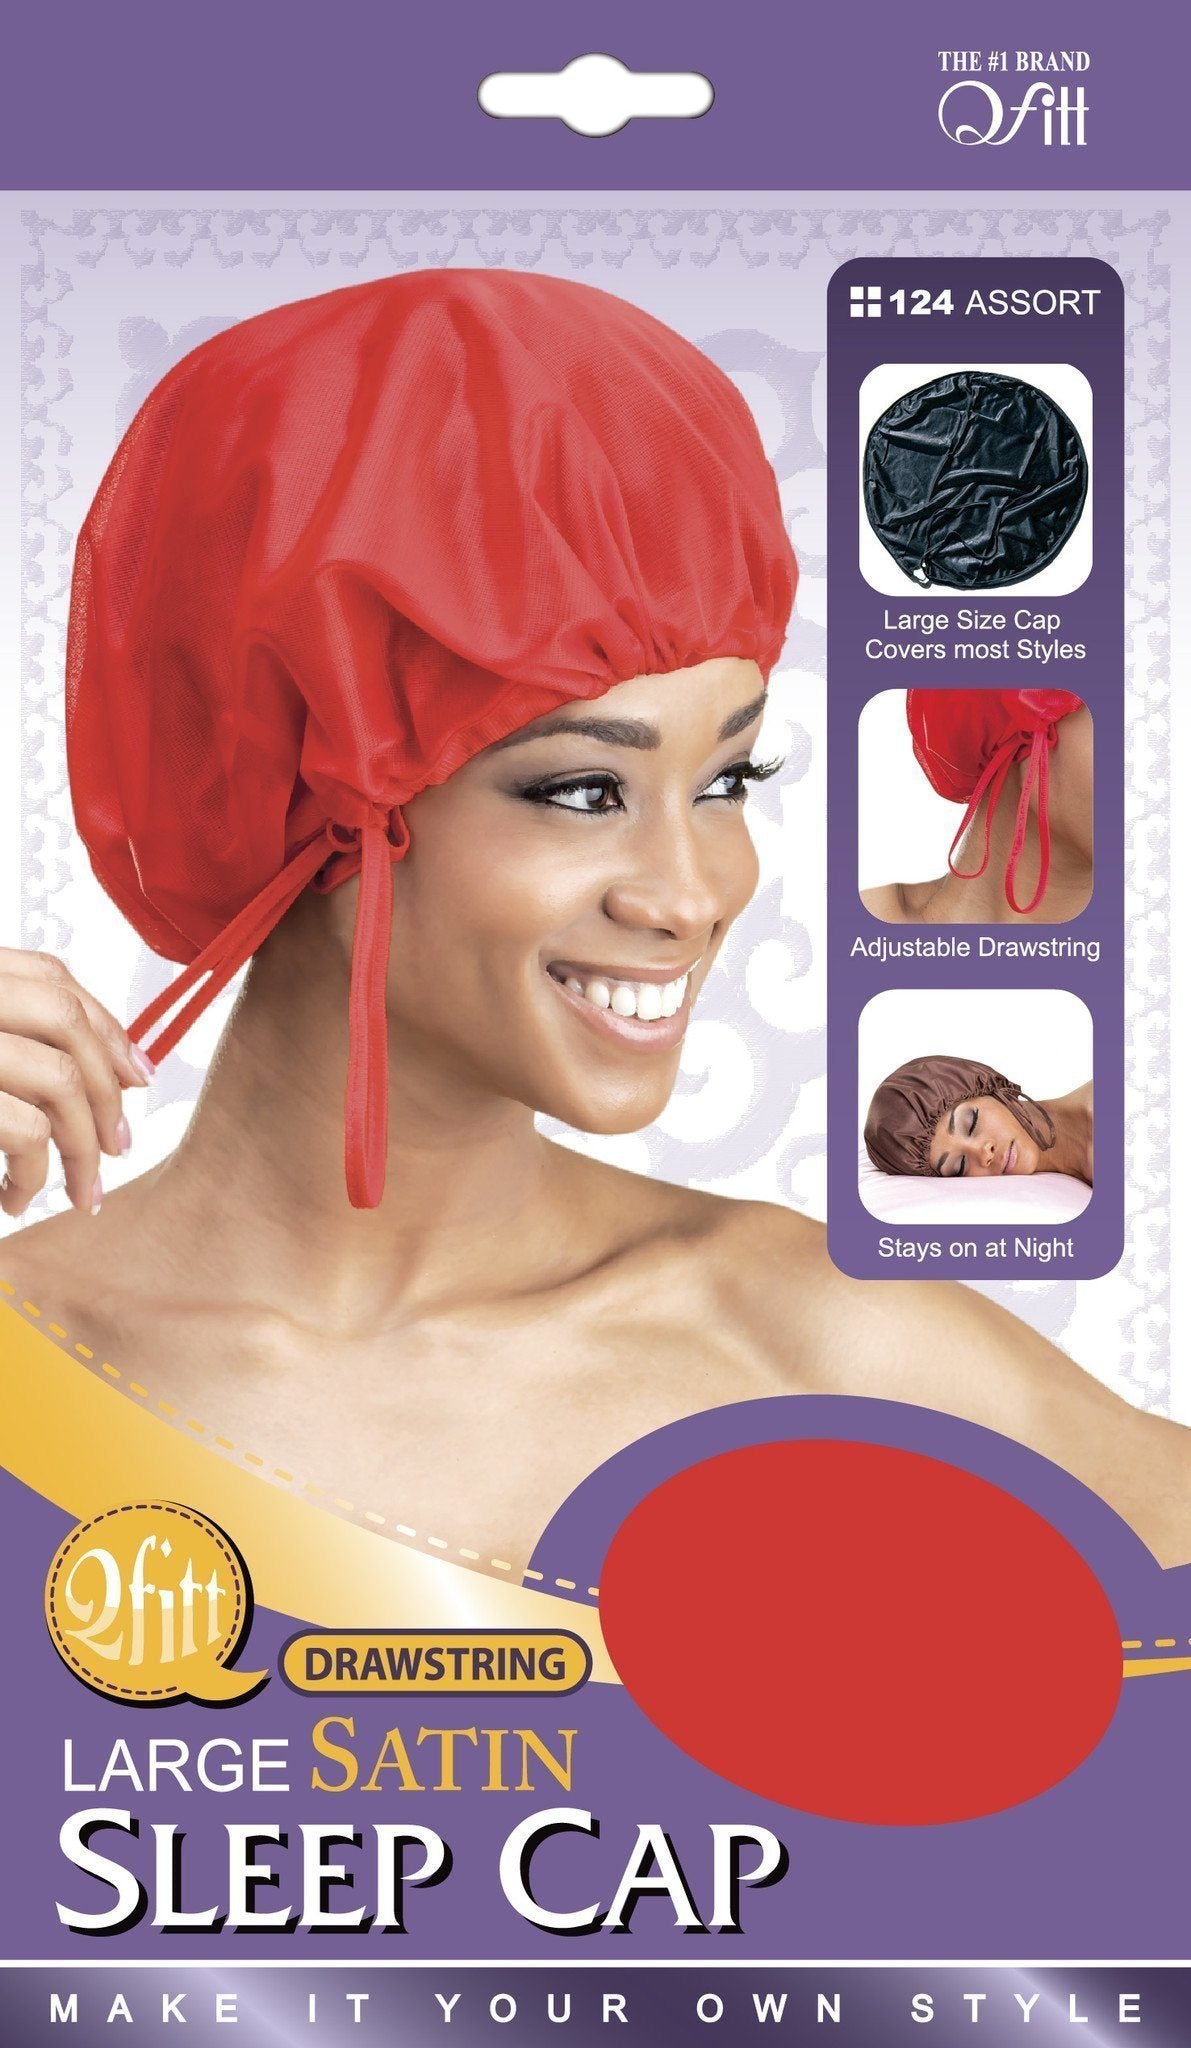 RED by Kiss Silky Satin Durag #HD1-9 (12PC) -  : Beauty Supply,  Fashion, and Jewelry Wholesale Distributor